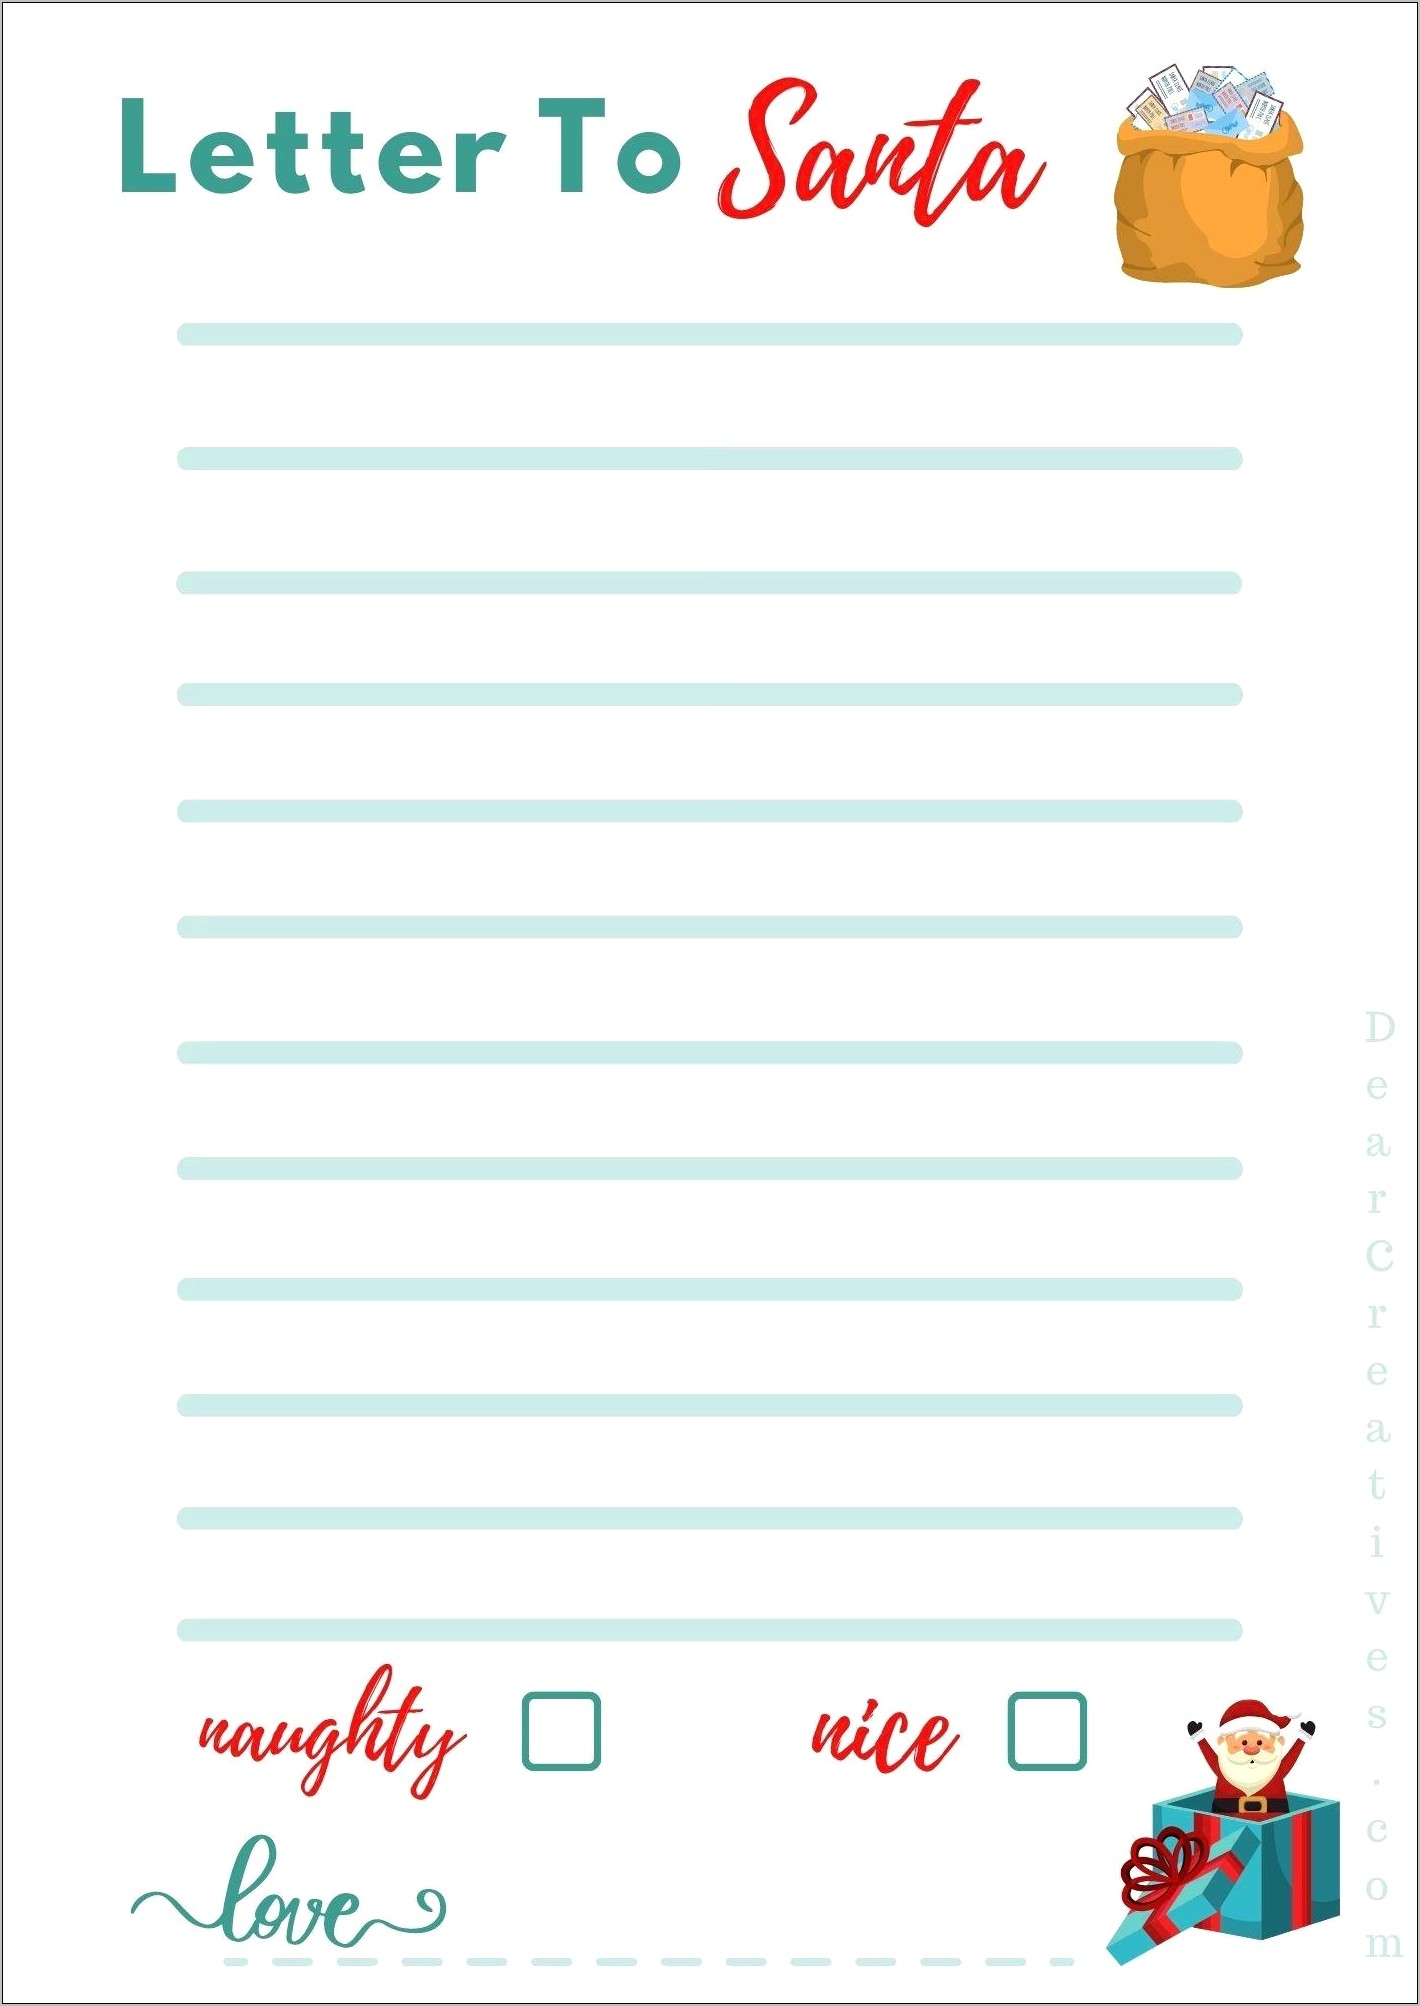 A Letter To Santa Template Free